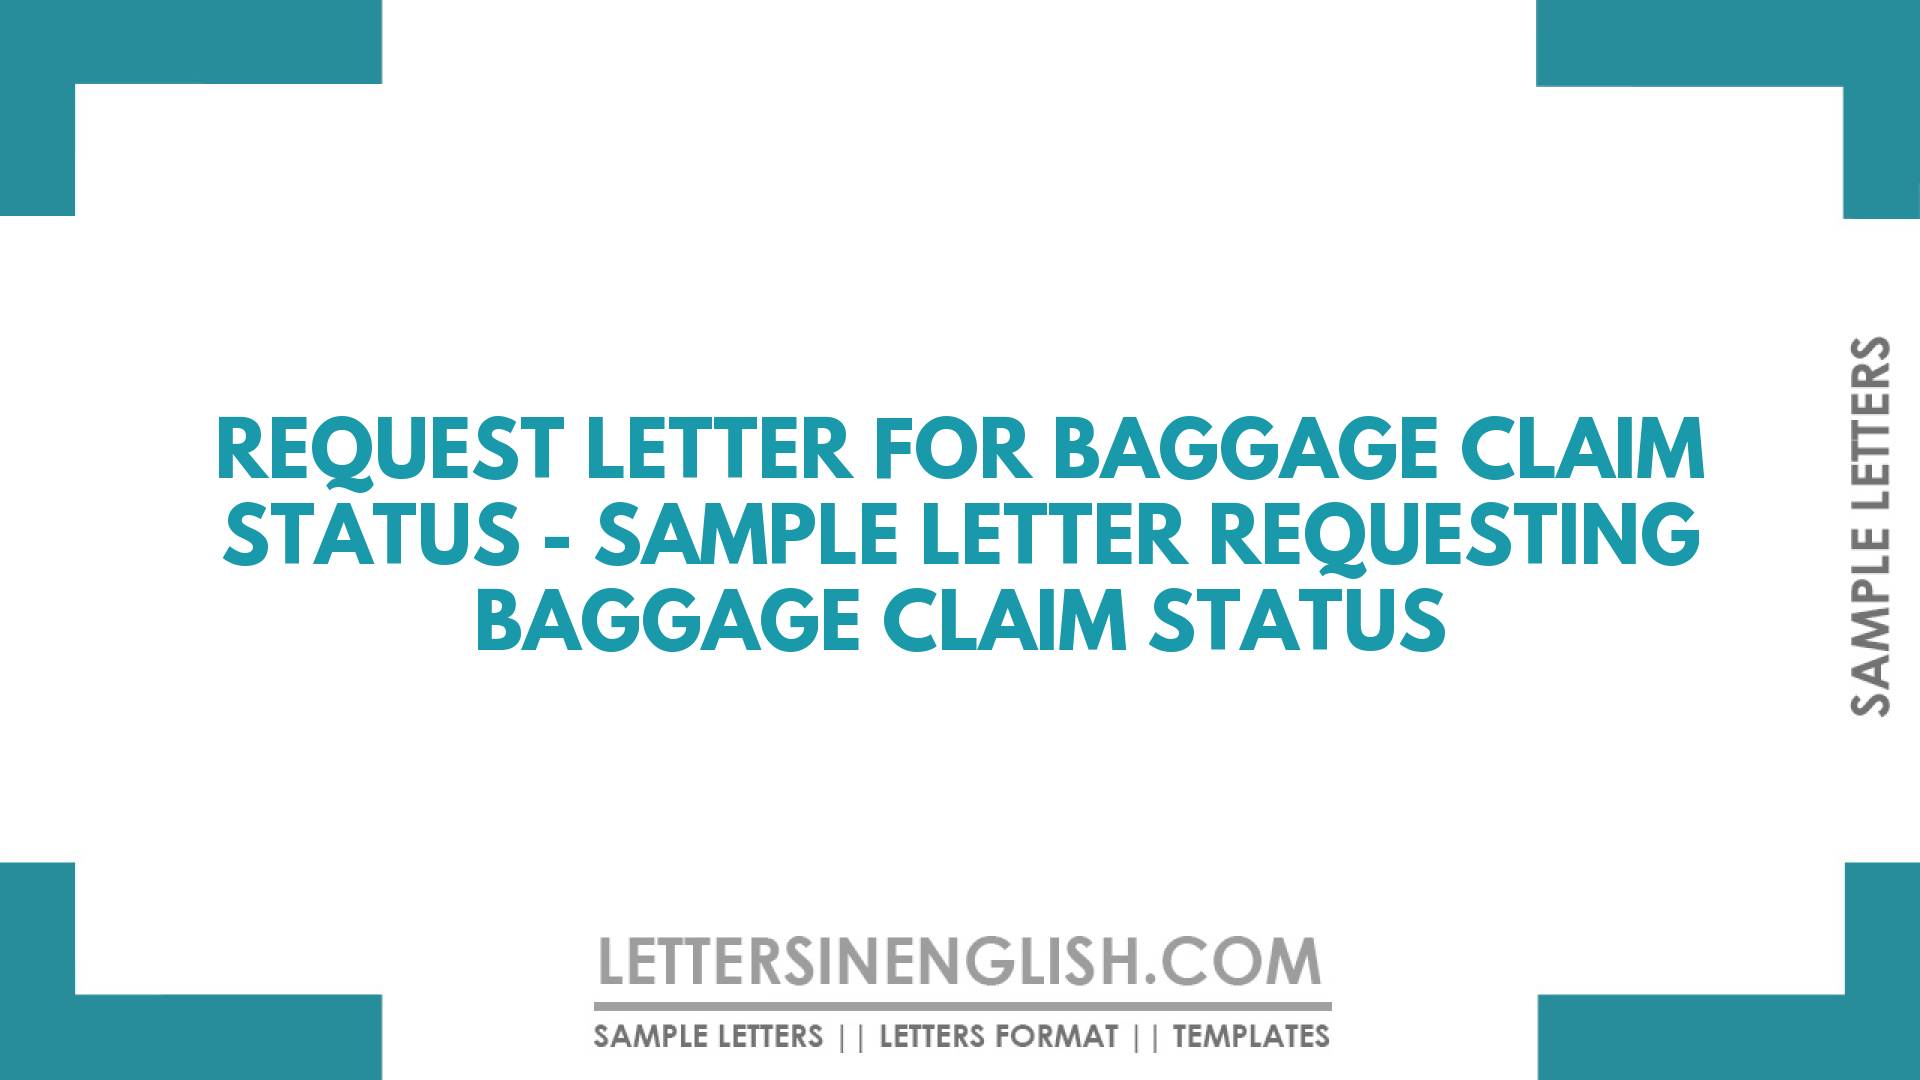 Request Letter For Baggage Claim Status Sample Letter Requesting Baggage Claim Status 9333